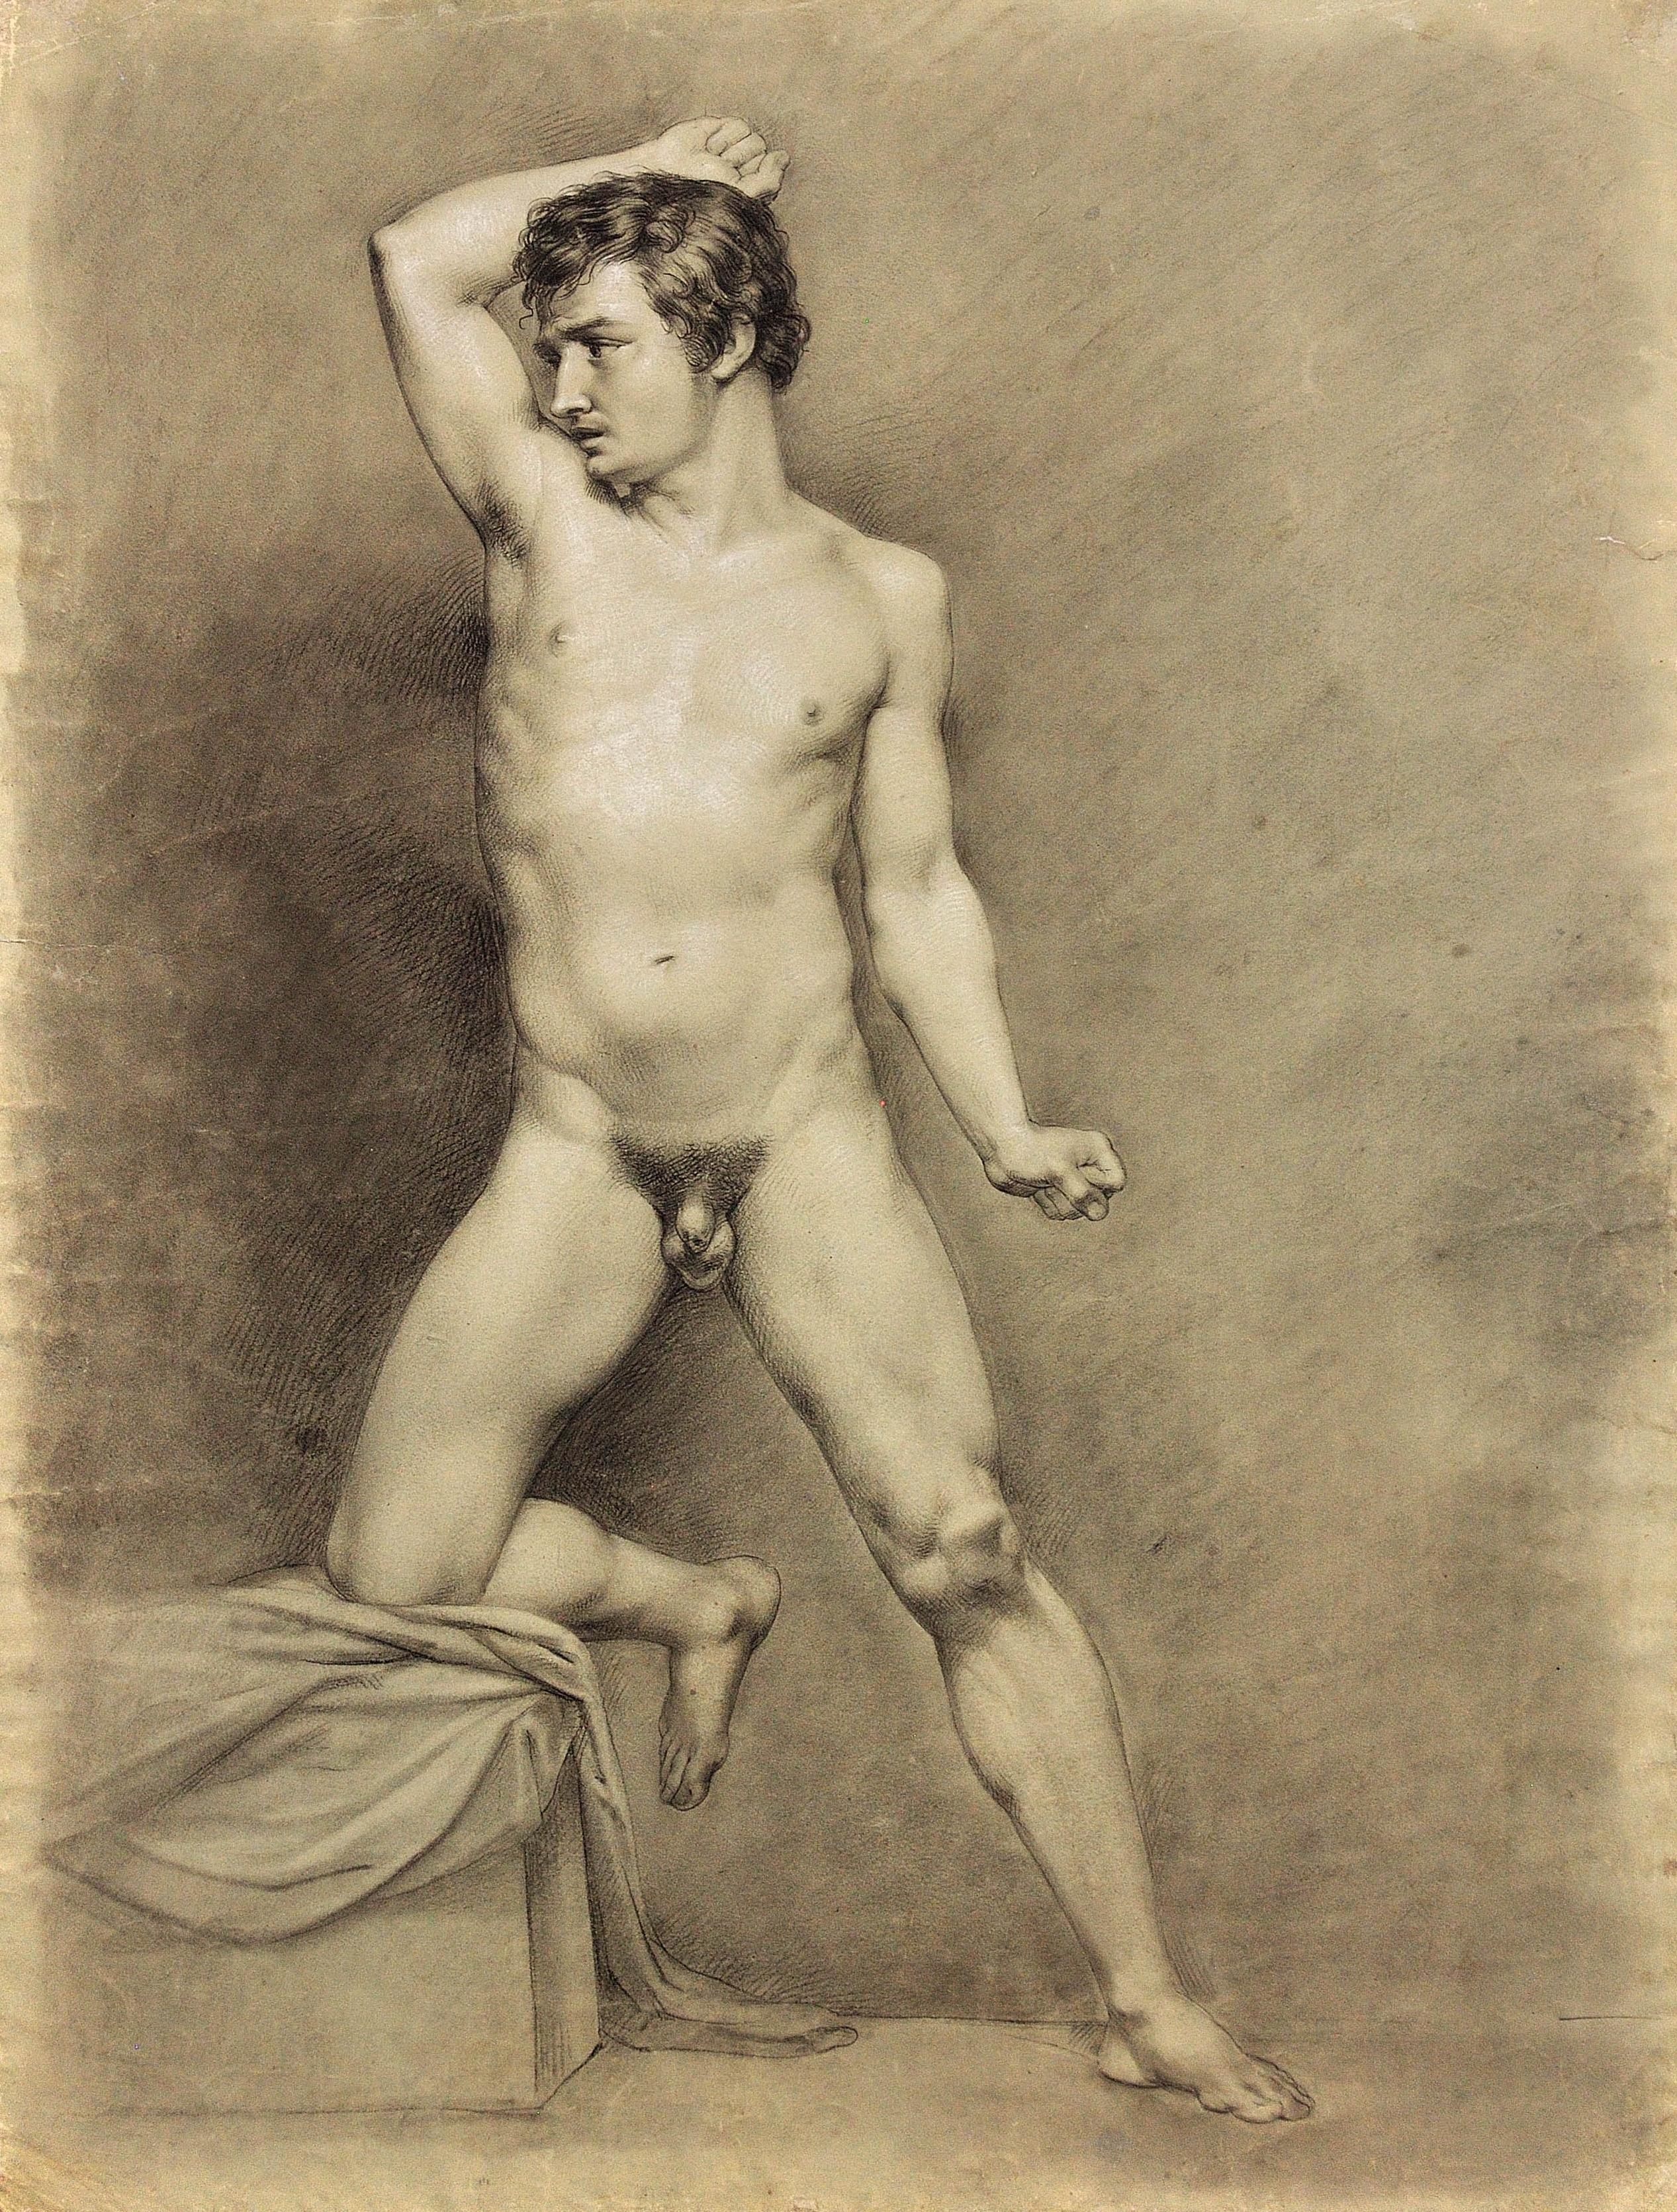 Eduard Braun.
German ( b.1798 - d.1876 ).
Academic Life Study of a Male Nude Half Kneeling Pose
Pencil and Charcoal on Paper with Heightening on paper.
Paper size 22.8 inches x 17.3 inches ( 58cm x 44cm ).
Frame size 29.9 inches x 24.8 inches ( 76cm